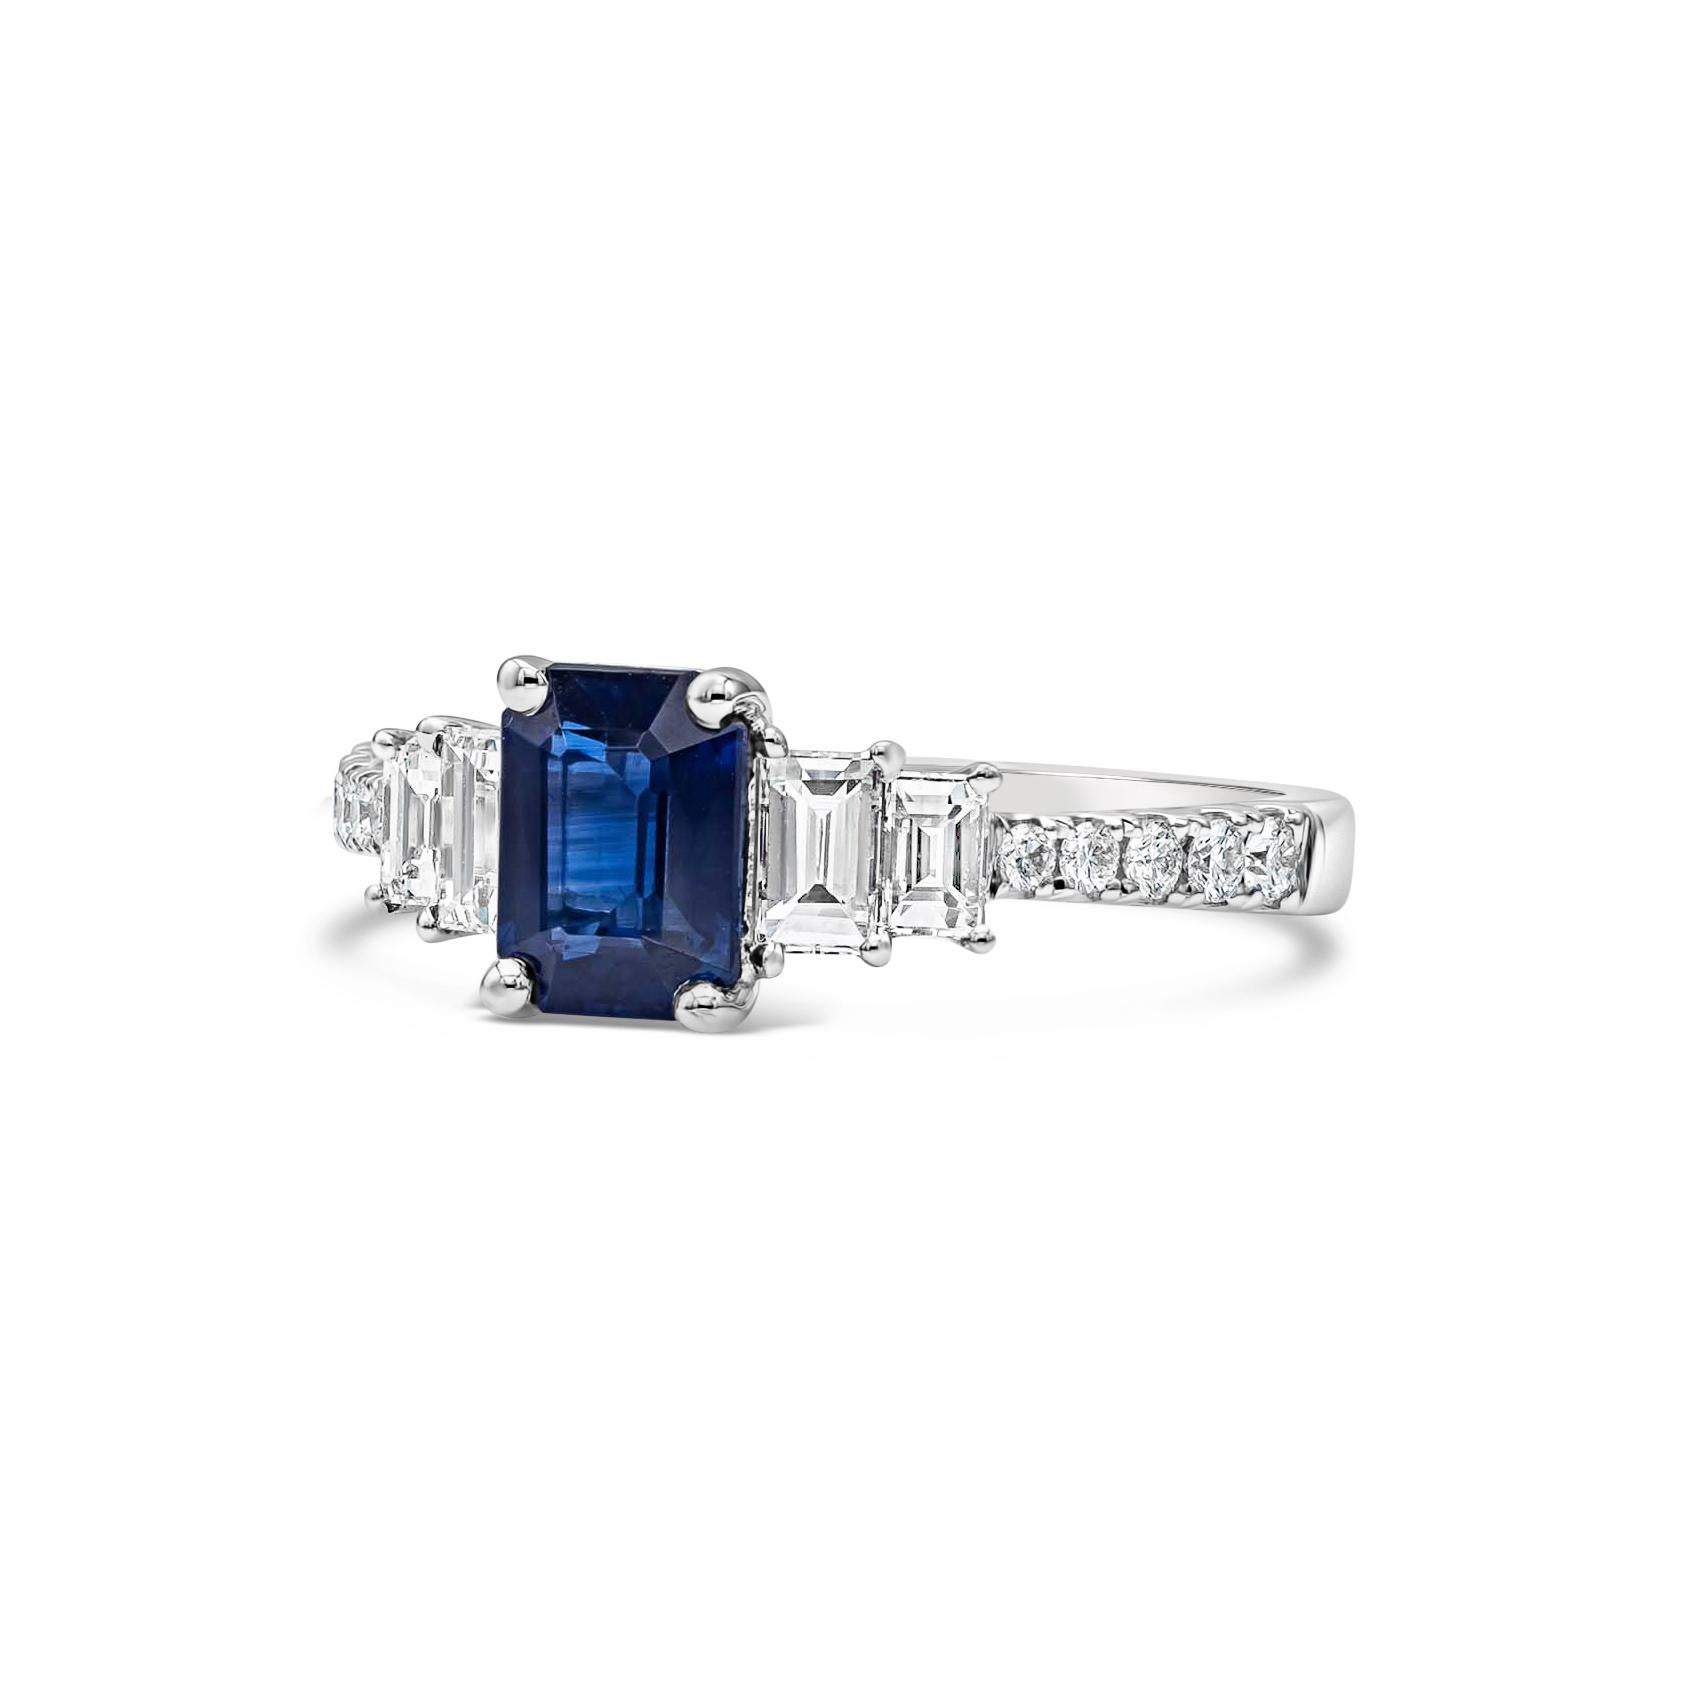 Features a 1.17 carat vibrant blue sapphire flanked by step-cut diamonds on either side. Set in a diamond encrusted band made in 18k white gold. Diamonds weigh 0.61 carats total and are approximately G color, VS clarity. Size 6.5 US.

Roman Malakov